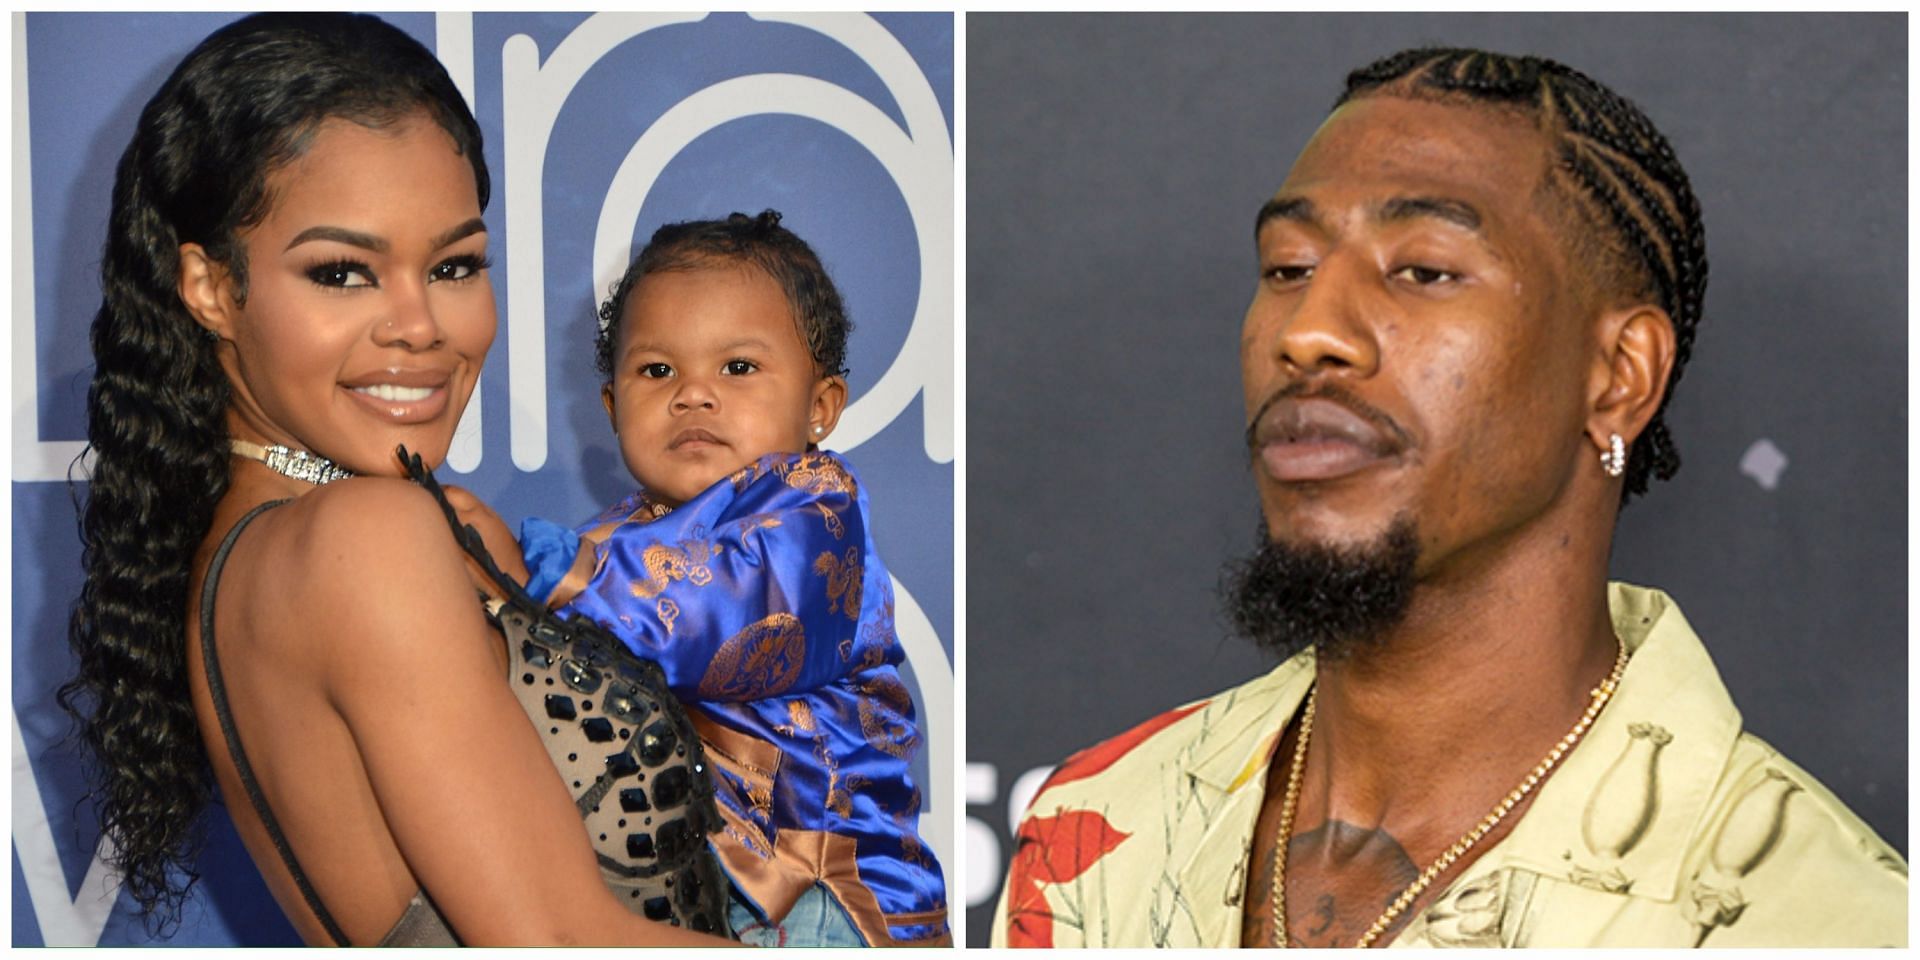 Iman Shumpert faces new allegations as Teyana Taylor accuses him of being under the influence of weed around their kids